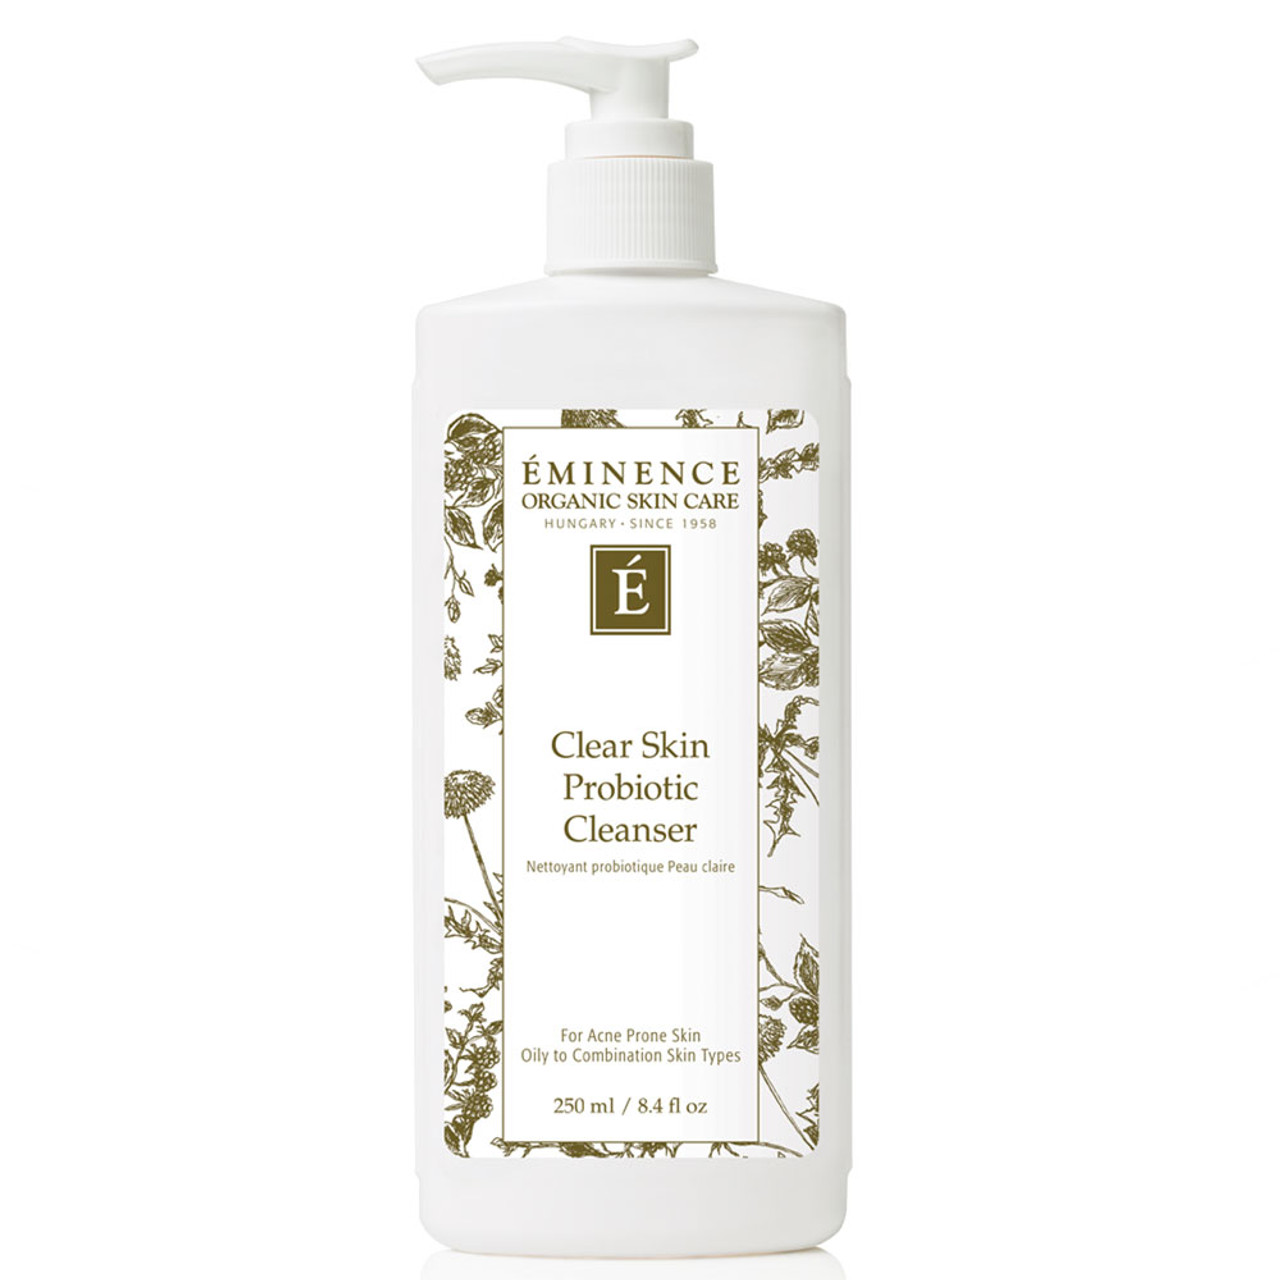 Eminence Clear Skin Probiotic Cleanser BeautifiedYou.com